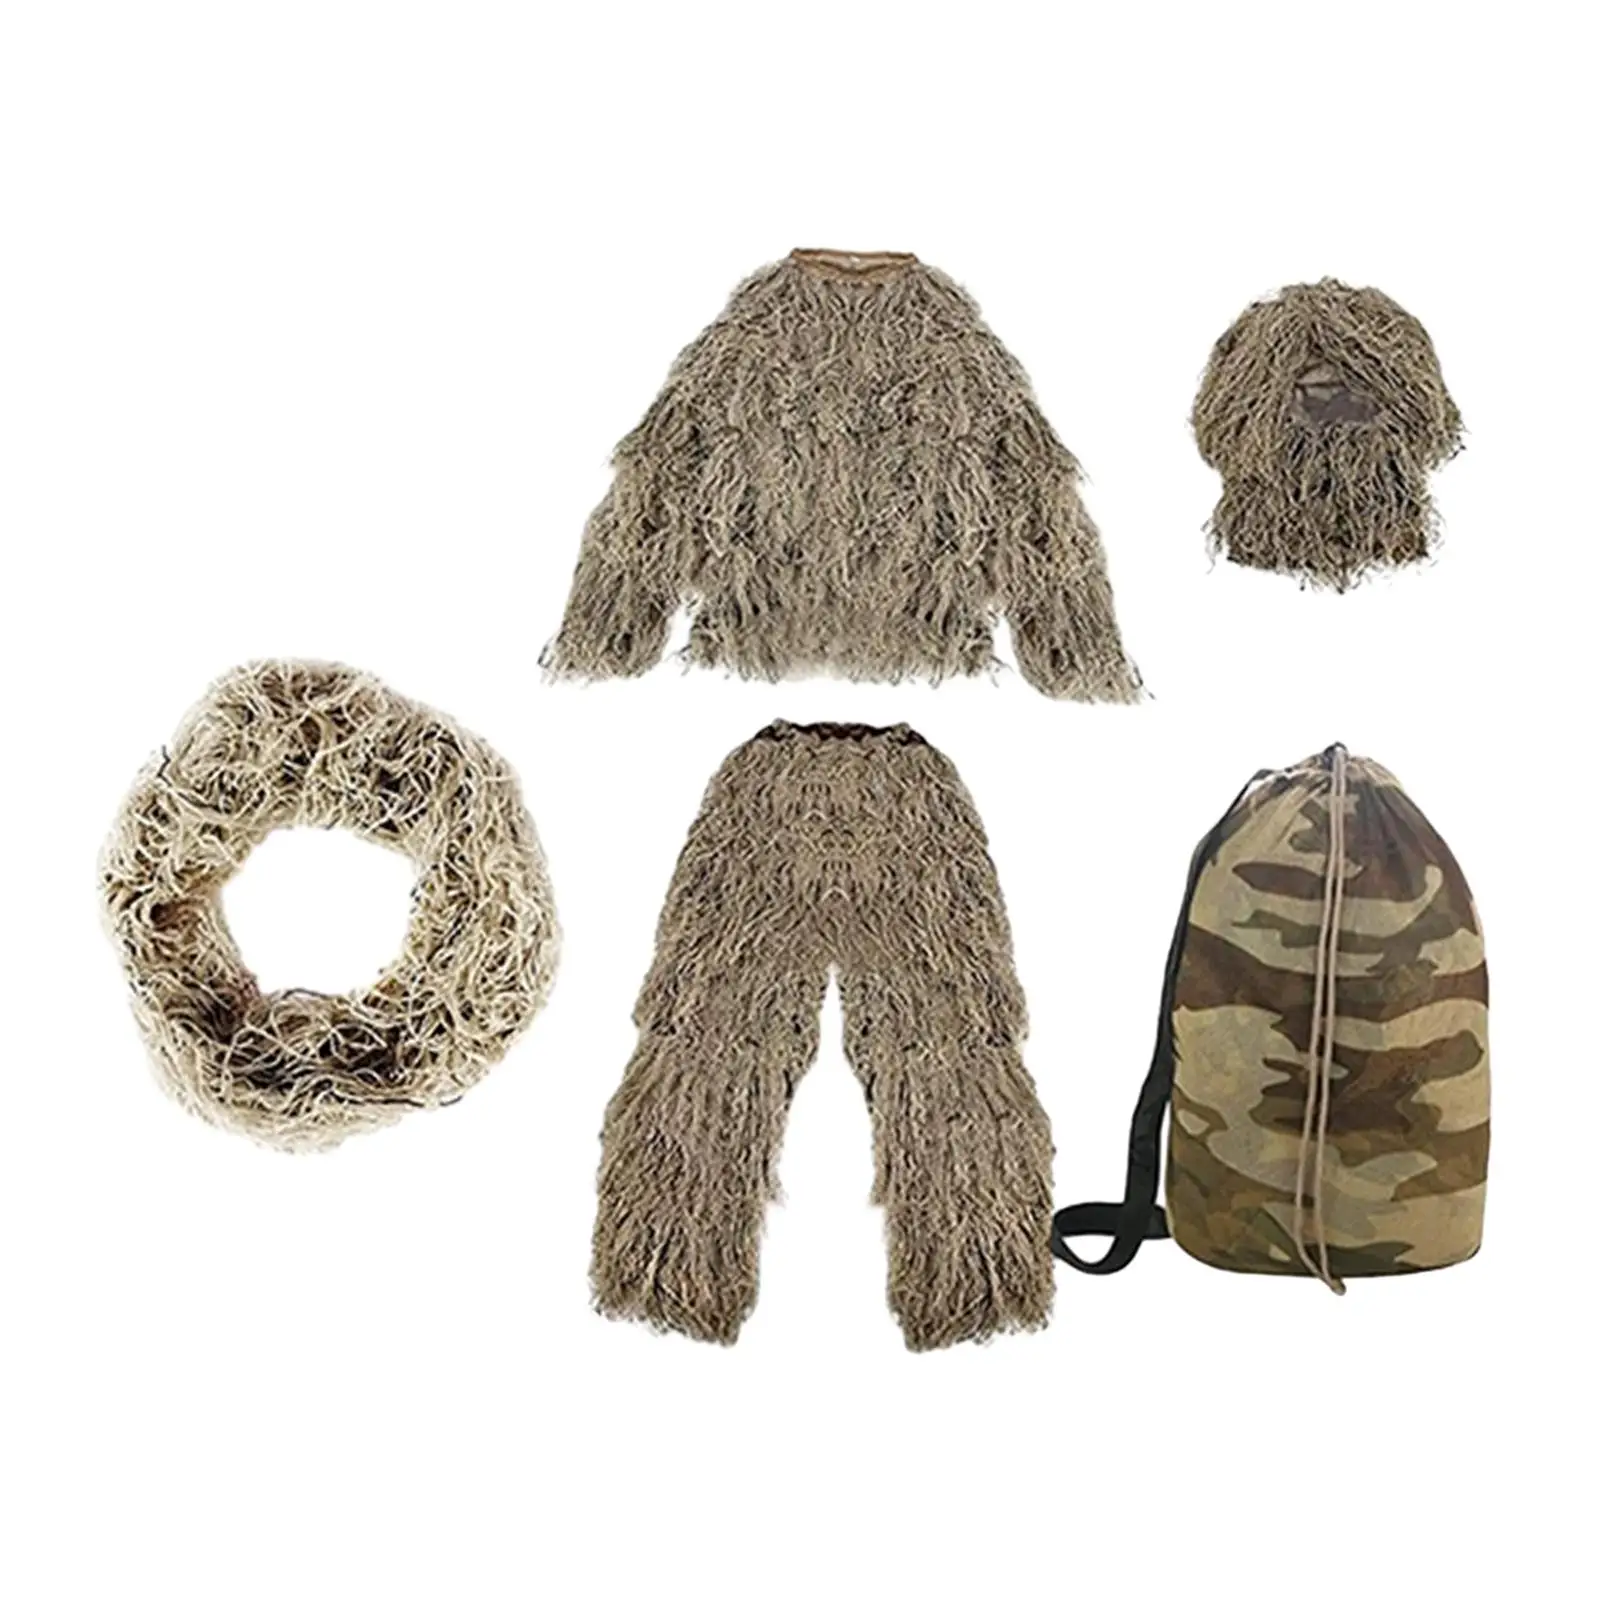 Kids Ghillie Suit Outfit Woodland Clothes Lightweight Clothing Uniform Set for Game Photography Camping Birdwatching Jungle